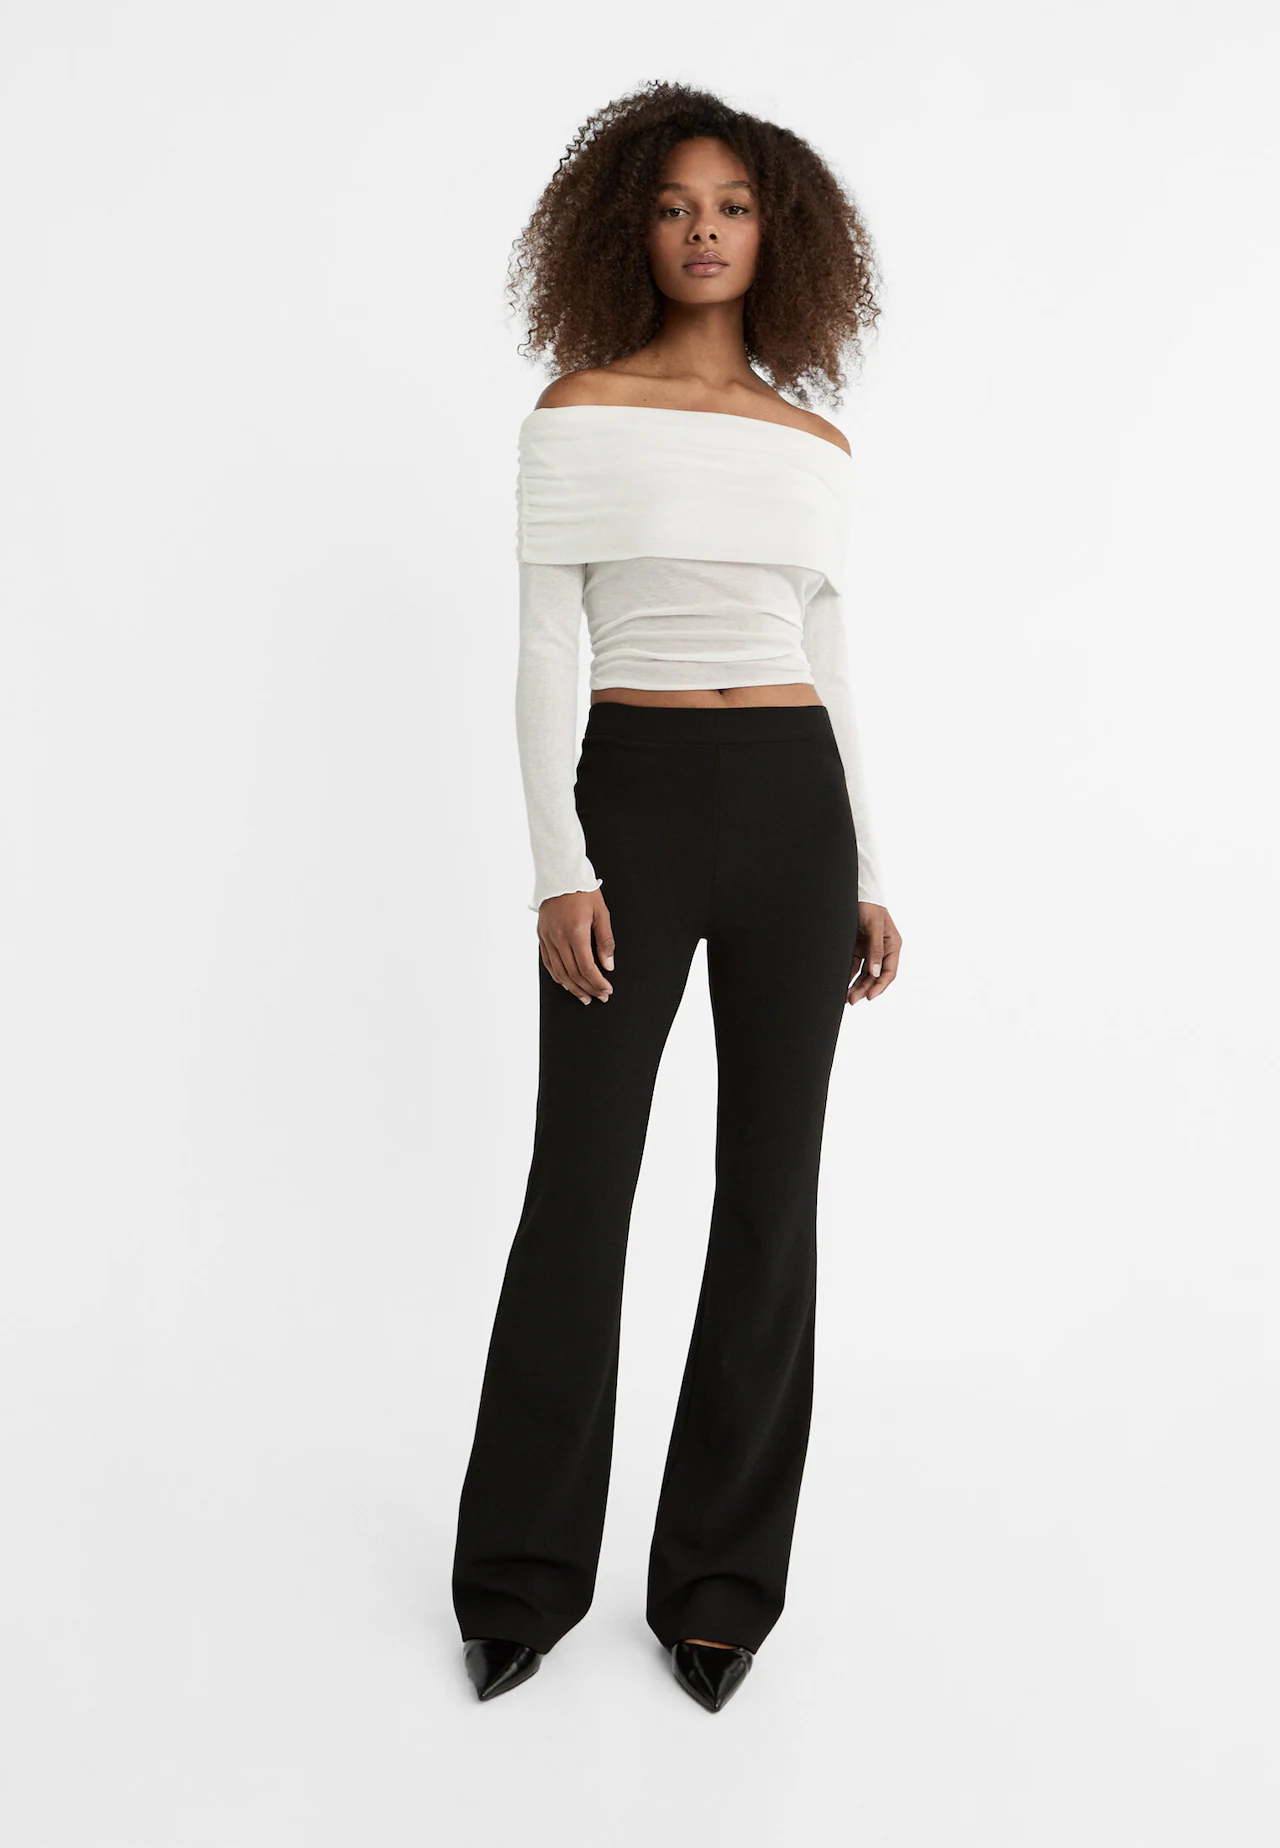 French Flare Pant, Black